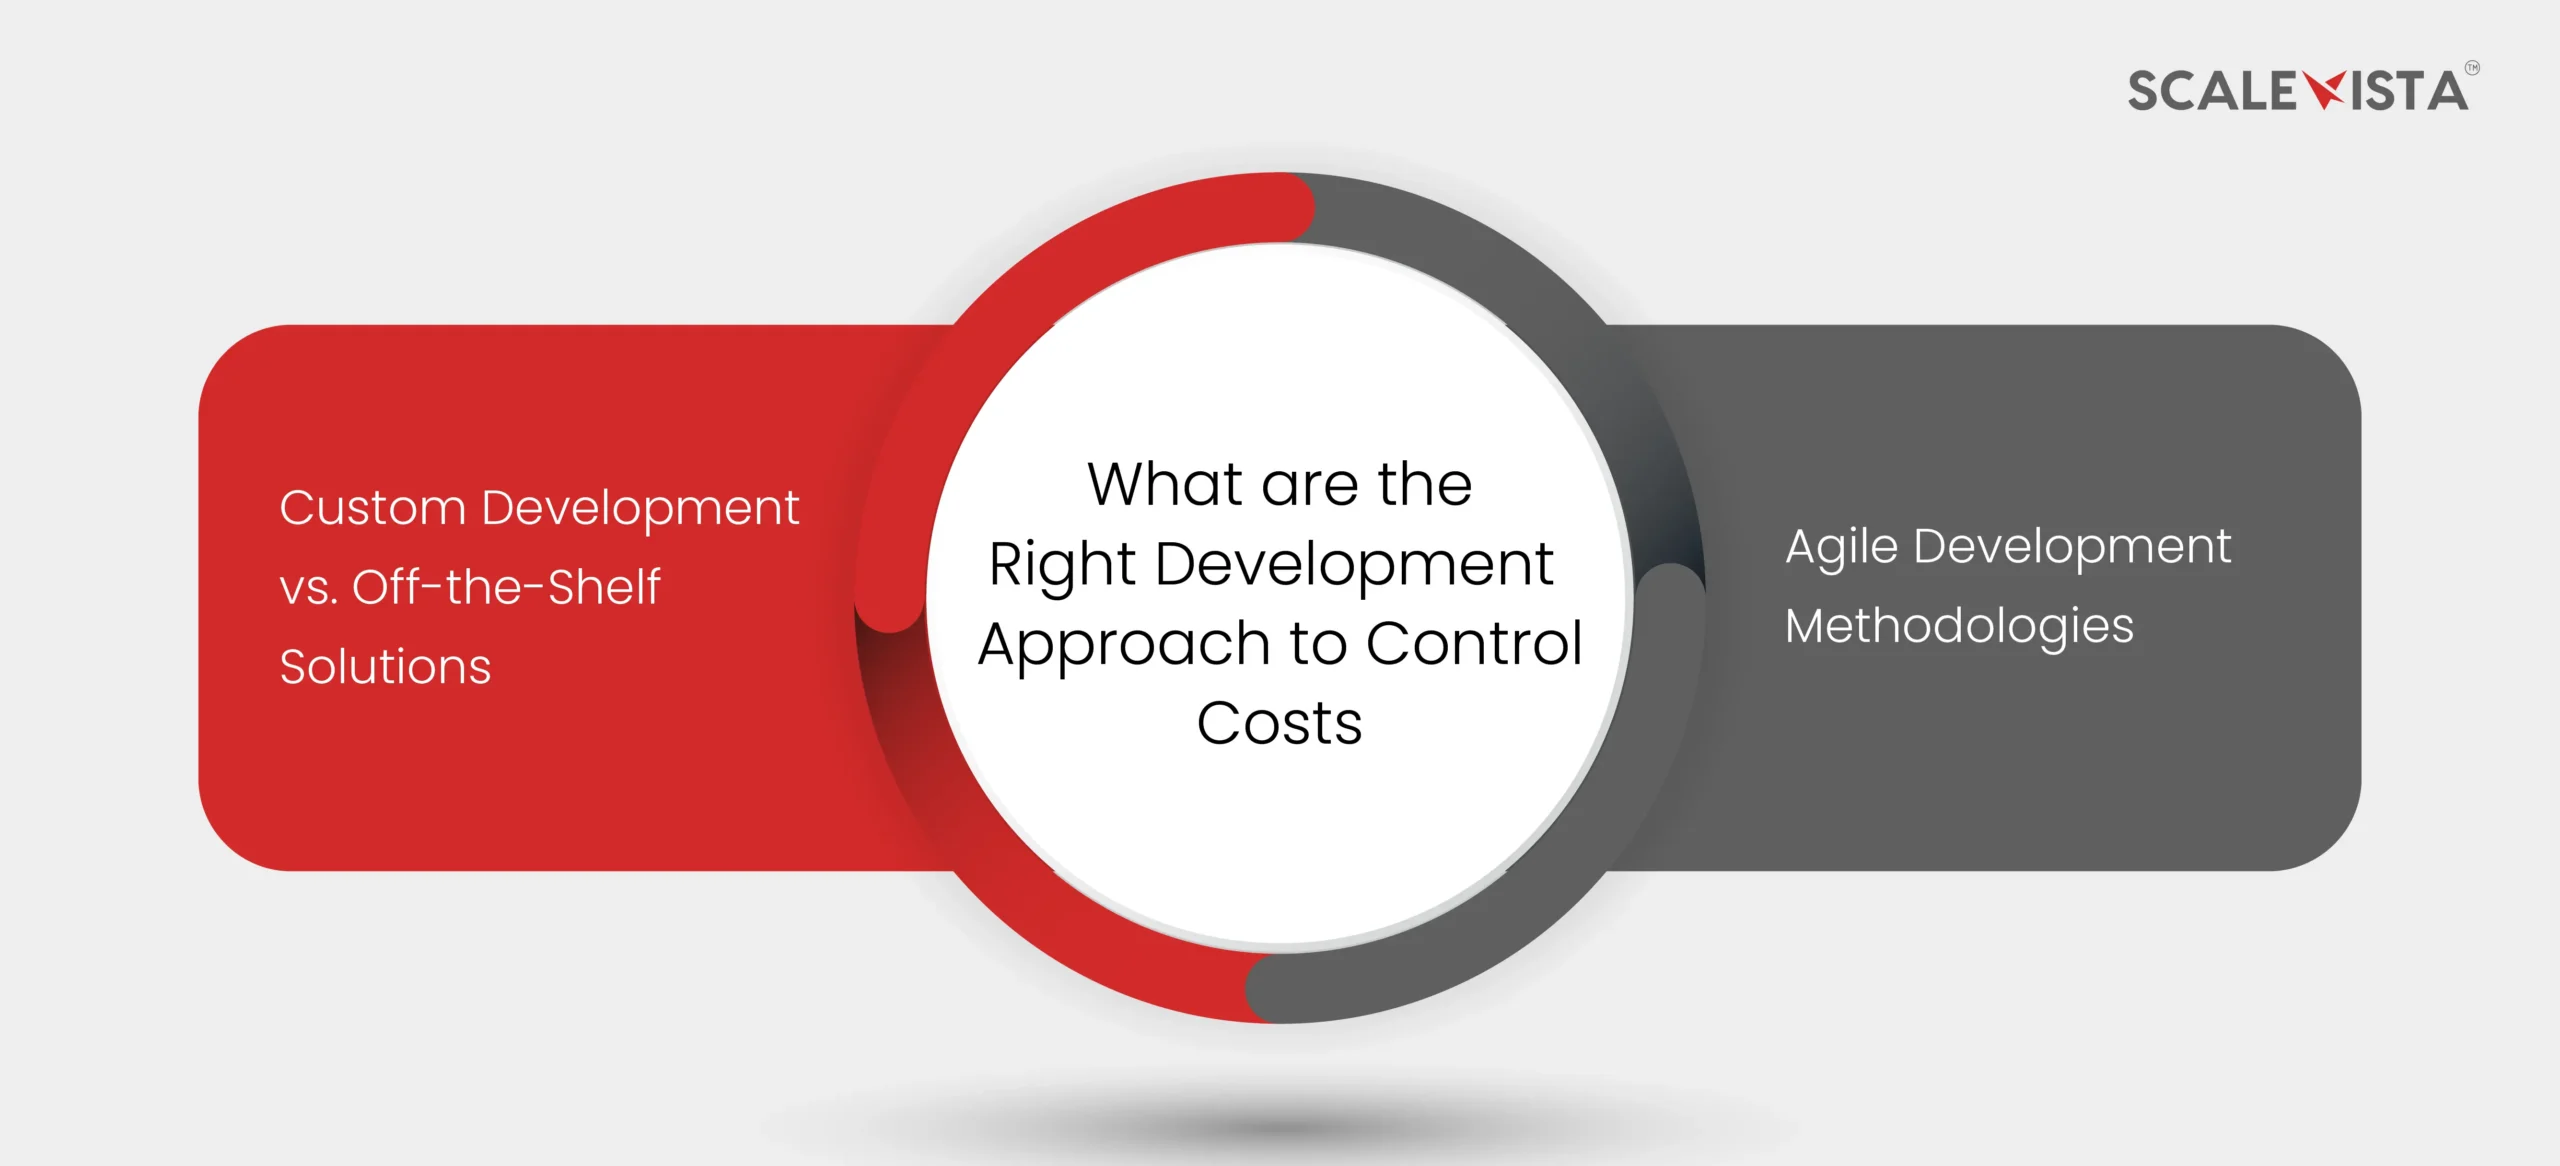 What are the Right Development Approach to Control Costs